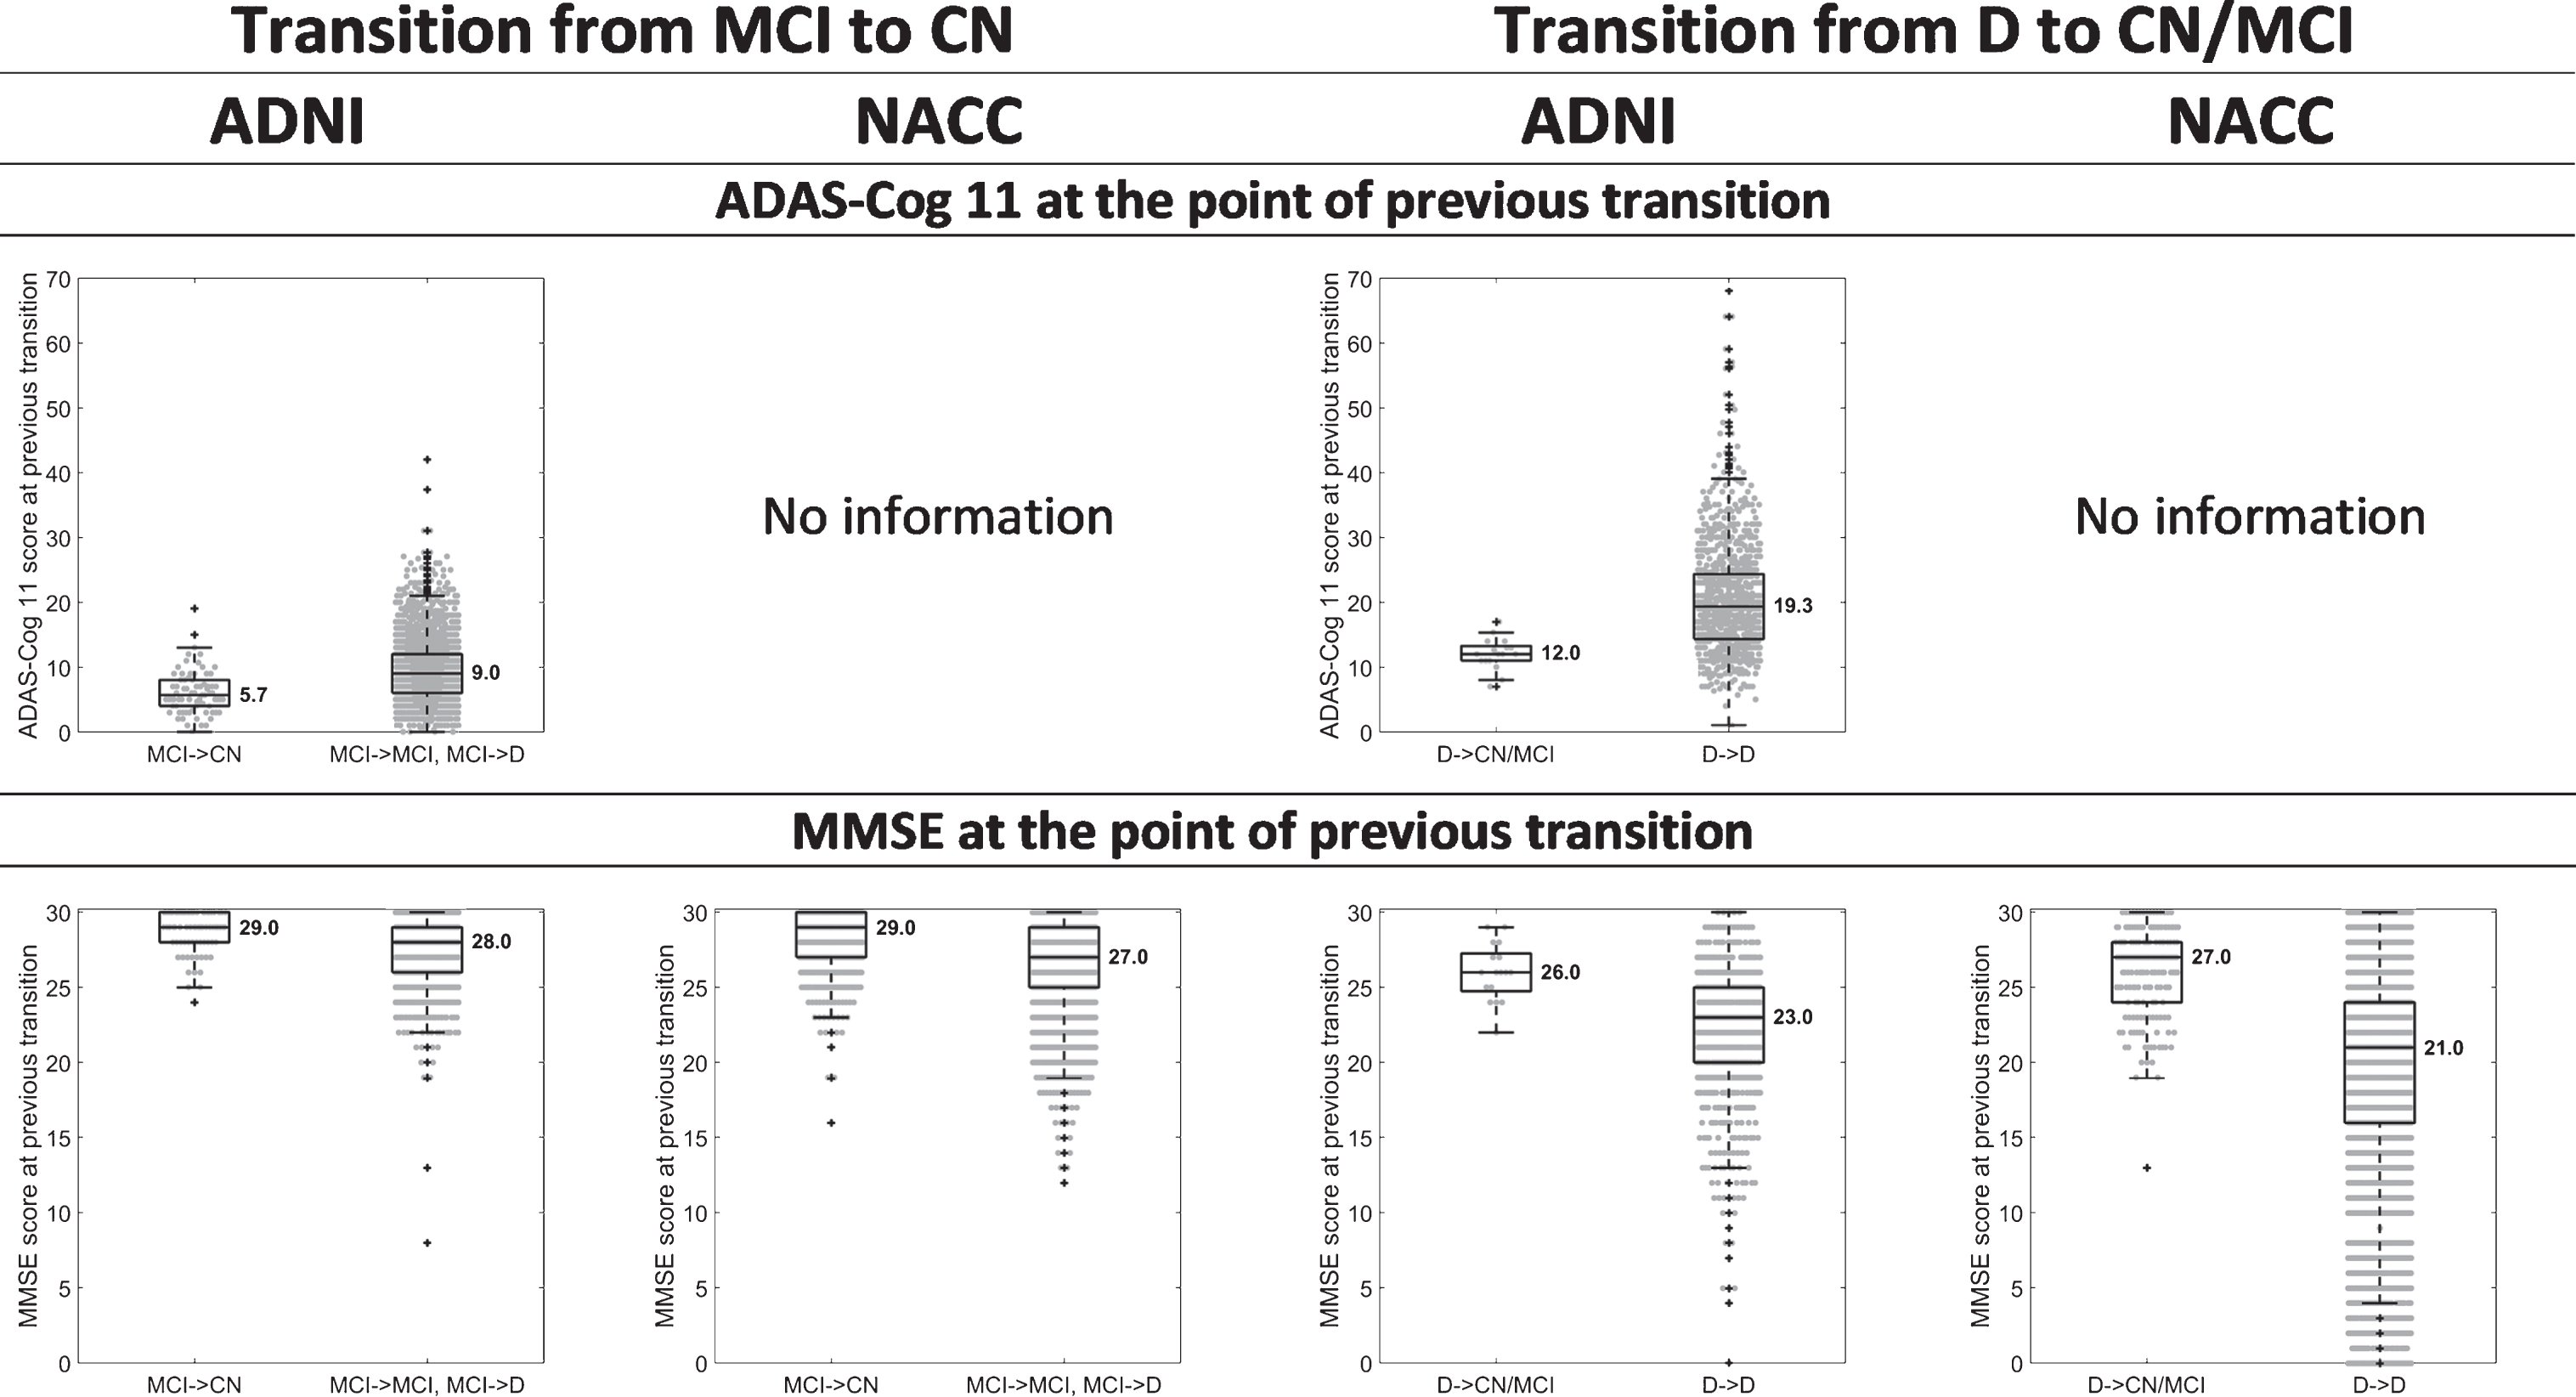 Box-and-whisker plots indicating differences in the median and variability of ADAS-Cog 11 and MMSE scores, between 1) those that transitioned from MCI to CN (MCI→CN) and those that transitioned from MCI to D (MCI→D) or remained at MCI (MCI→MCI), when assessed one year after the MCI diagnosis; and 2) those that transitioned from D to CN or MCI (D→CN/MCI) and those that remained at D (D→D), when assessed one year after the D diagnosis. The values presented are at the point of previous diagnosis, i.e., at the point of the first MCI diagnosis for the MCI→CN, MCI→MCI, and MCI→D transitions and at the point of the first D diagnosis for the D→CN, D→MCI, and D→D transitions.